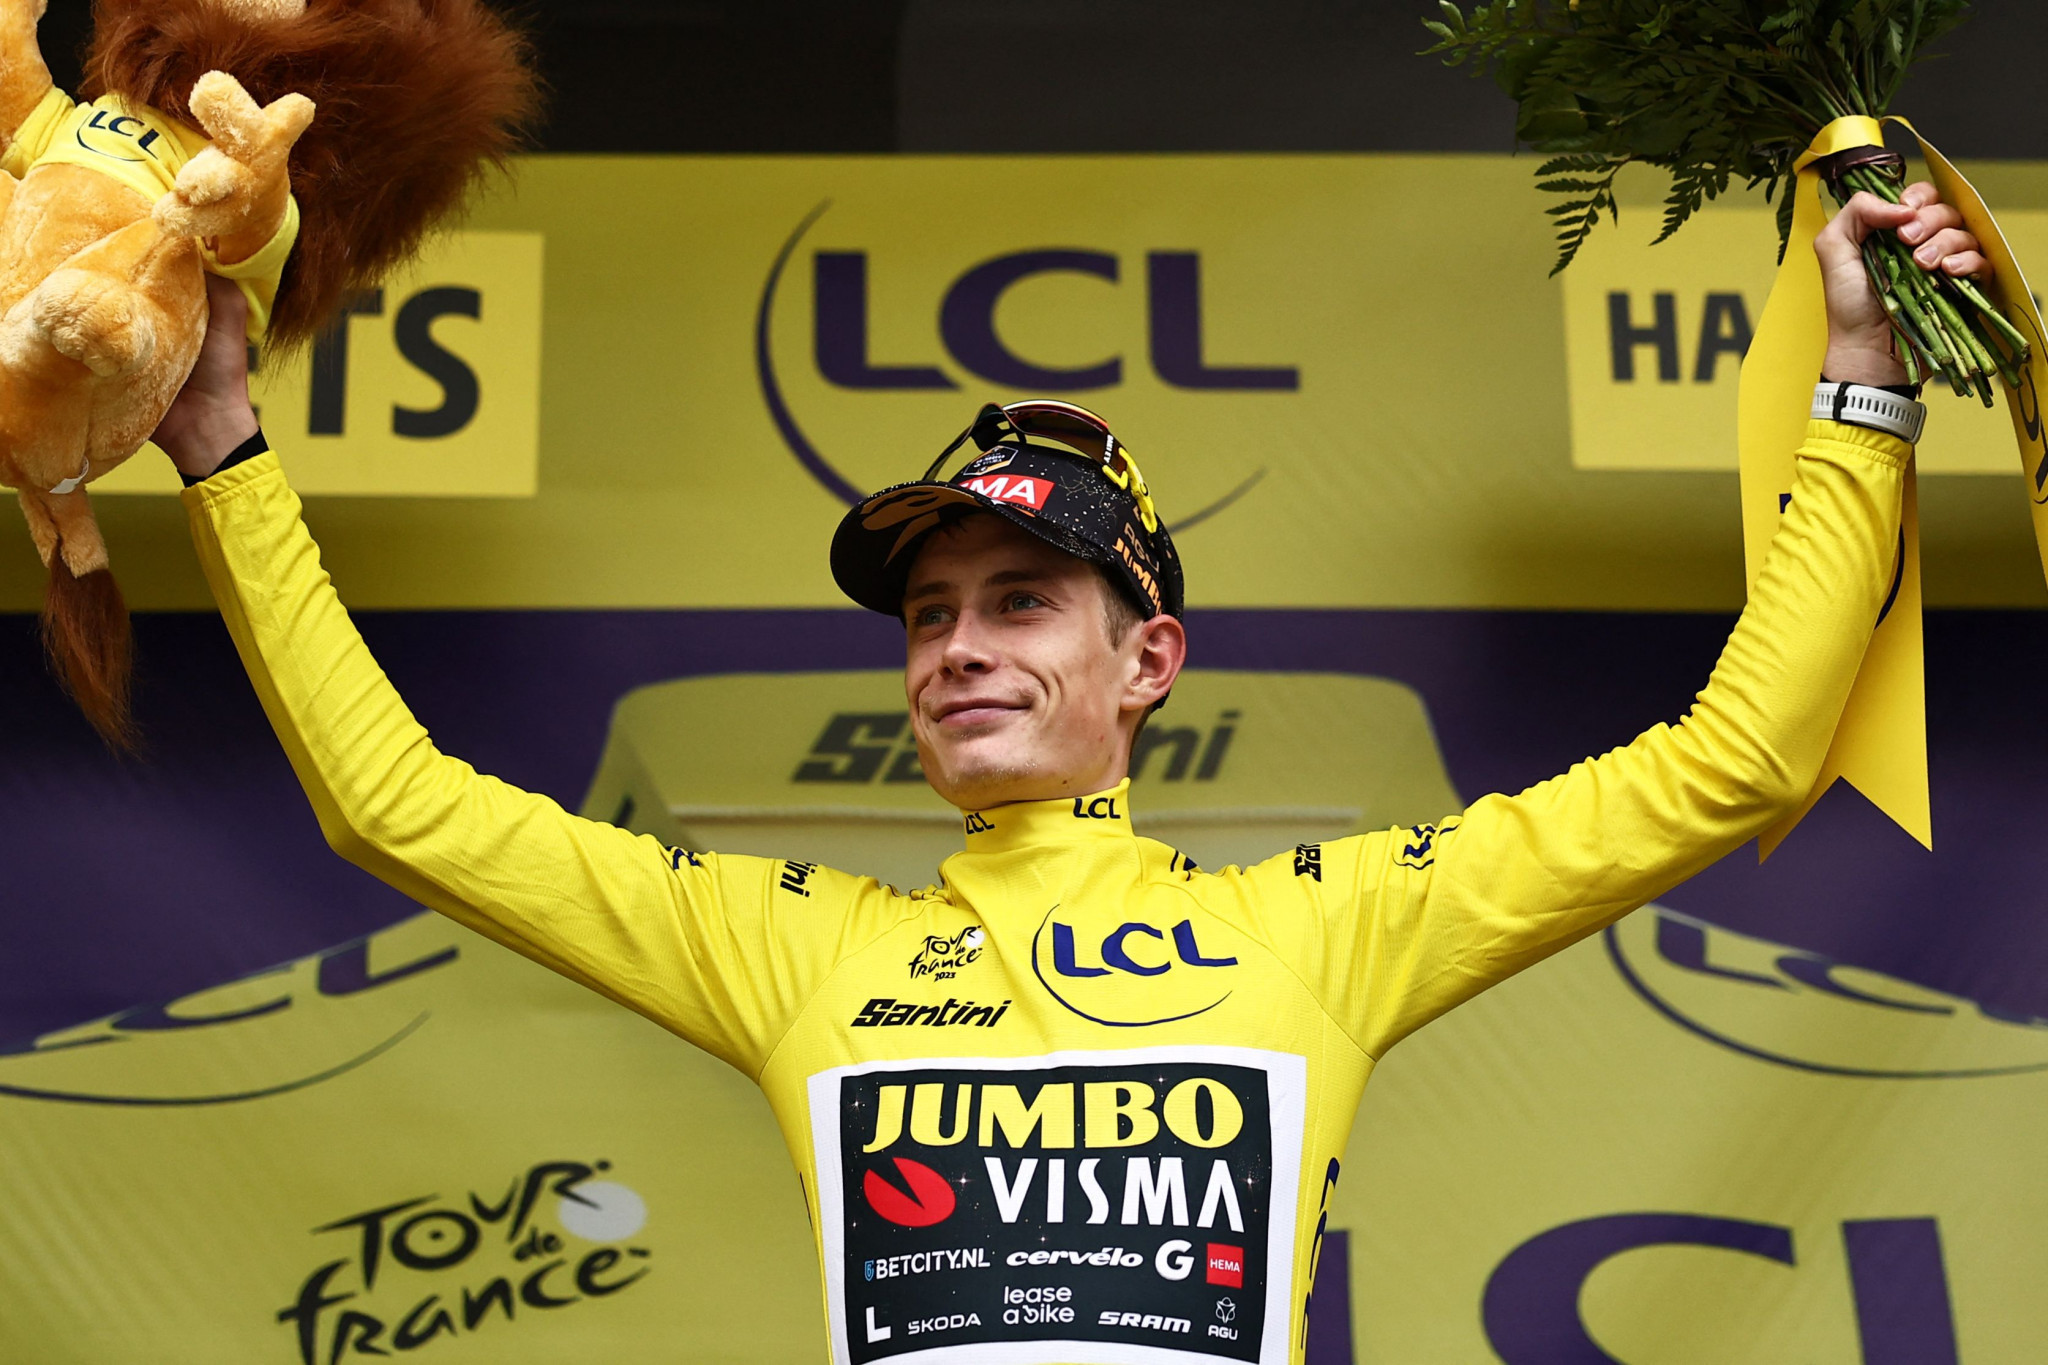 Defending champion Jonas Vingegaard of Denmark took over the yellow jersey as the Tour de France left the Pyrénées, but Slovenia's Tadej Pogačar more than halved his advantage over his biggest challenger ©Getty Images